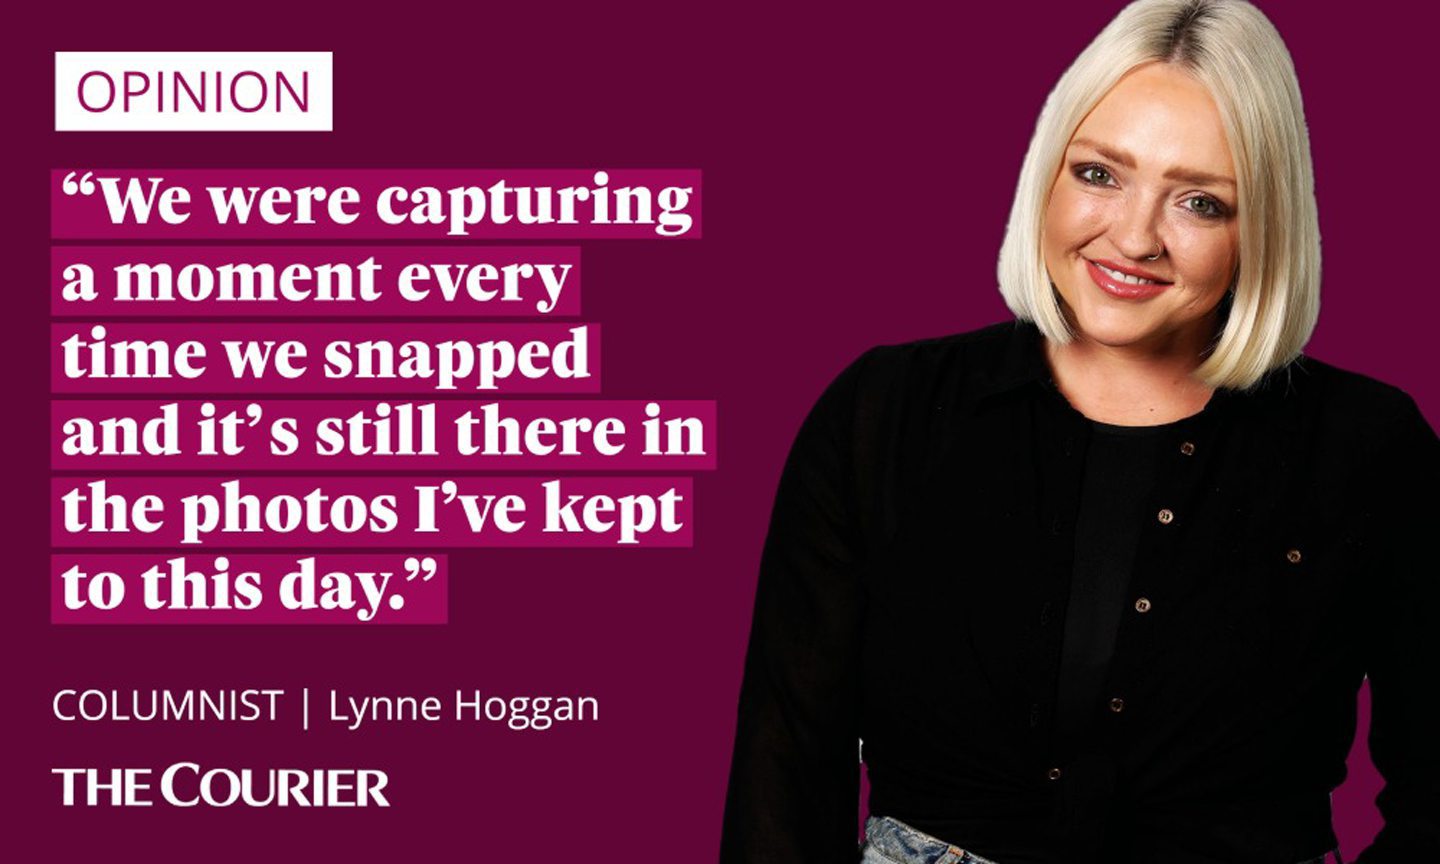 Lynne Hoggan quote card reading: "We were capturing a moment every time we snapped and it's still there in the photos I've kept to this day."